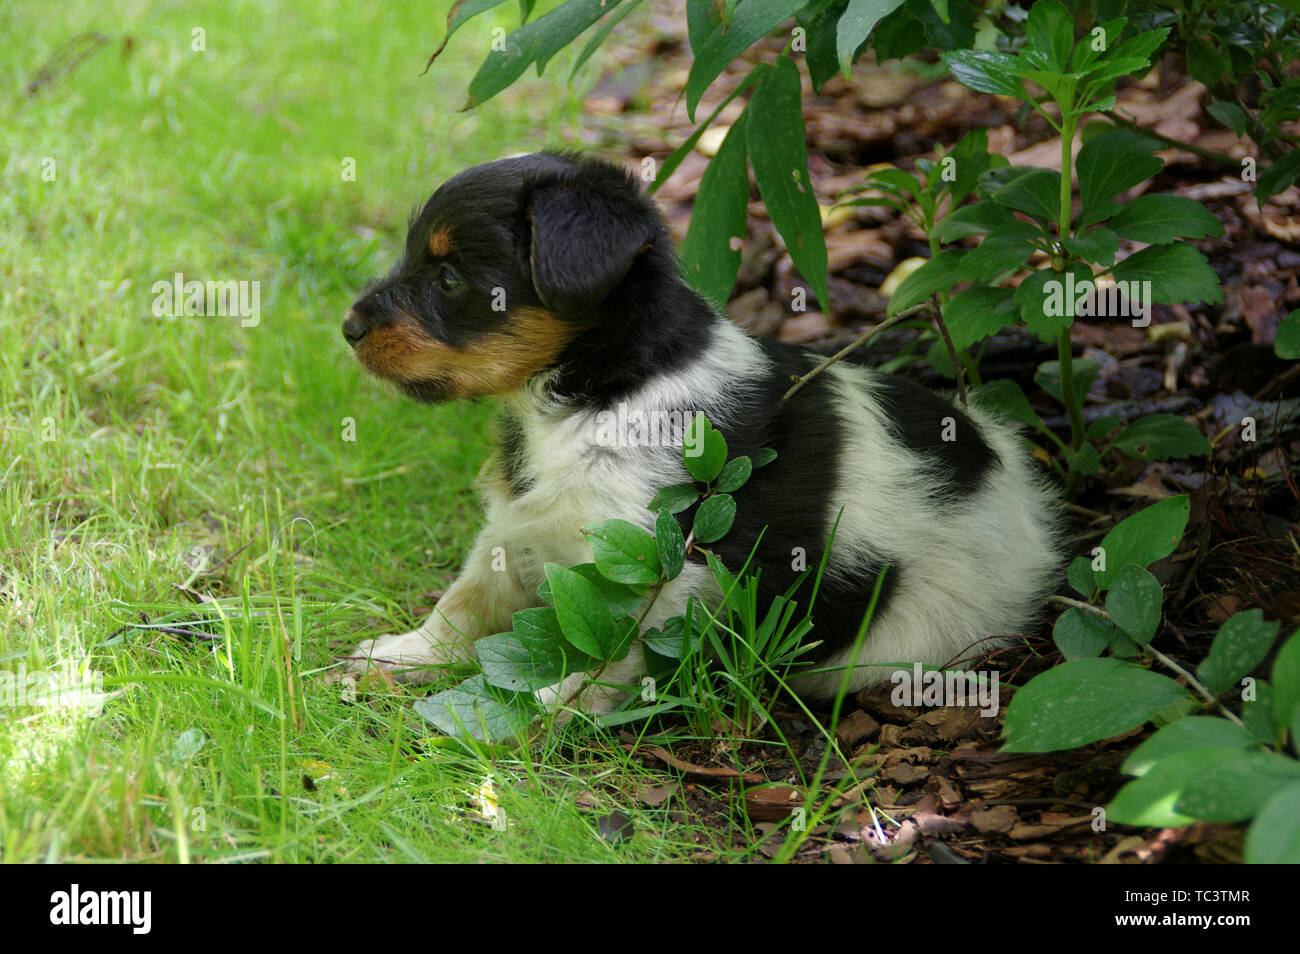 The puppy is sitting on the grass. The portrait of little dog gets to know the world with curiosity. Stock Photo